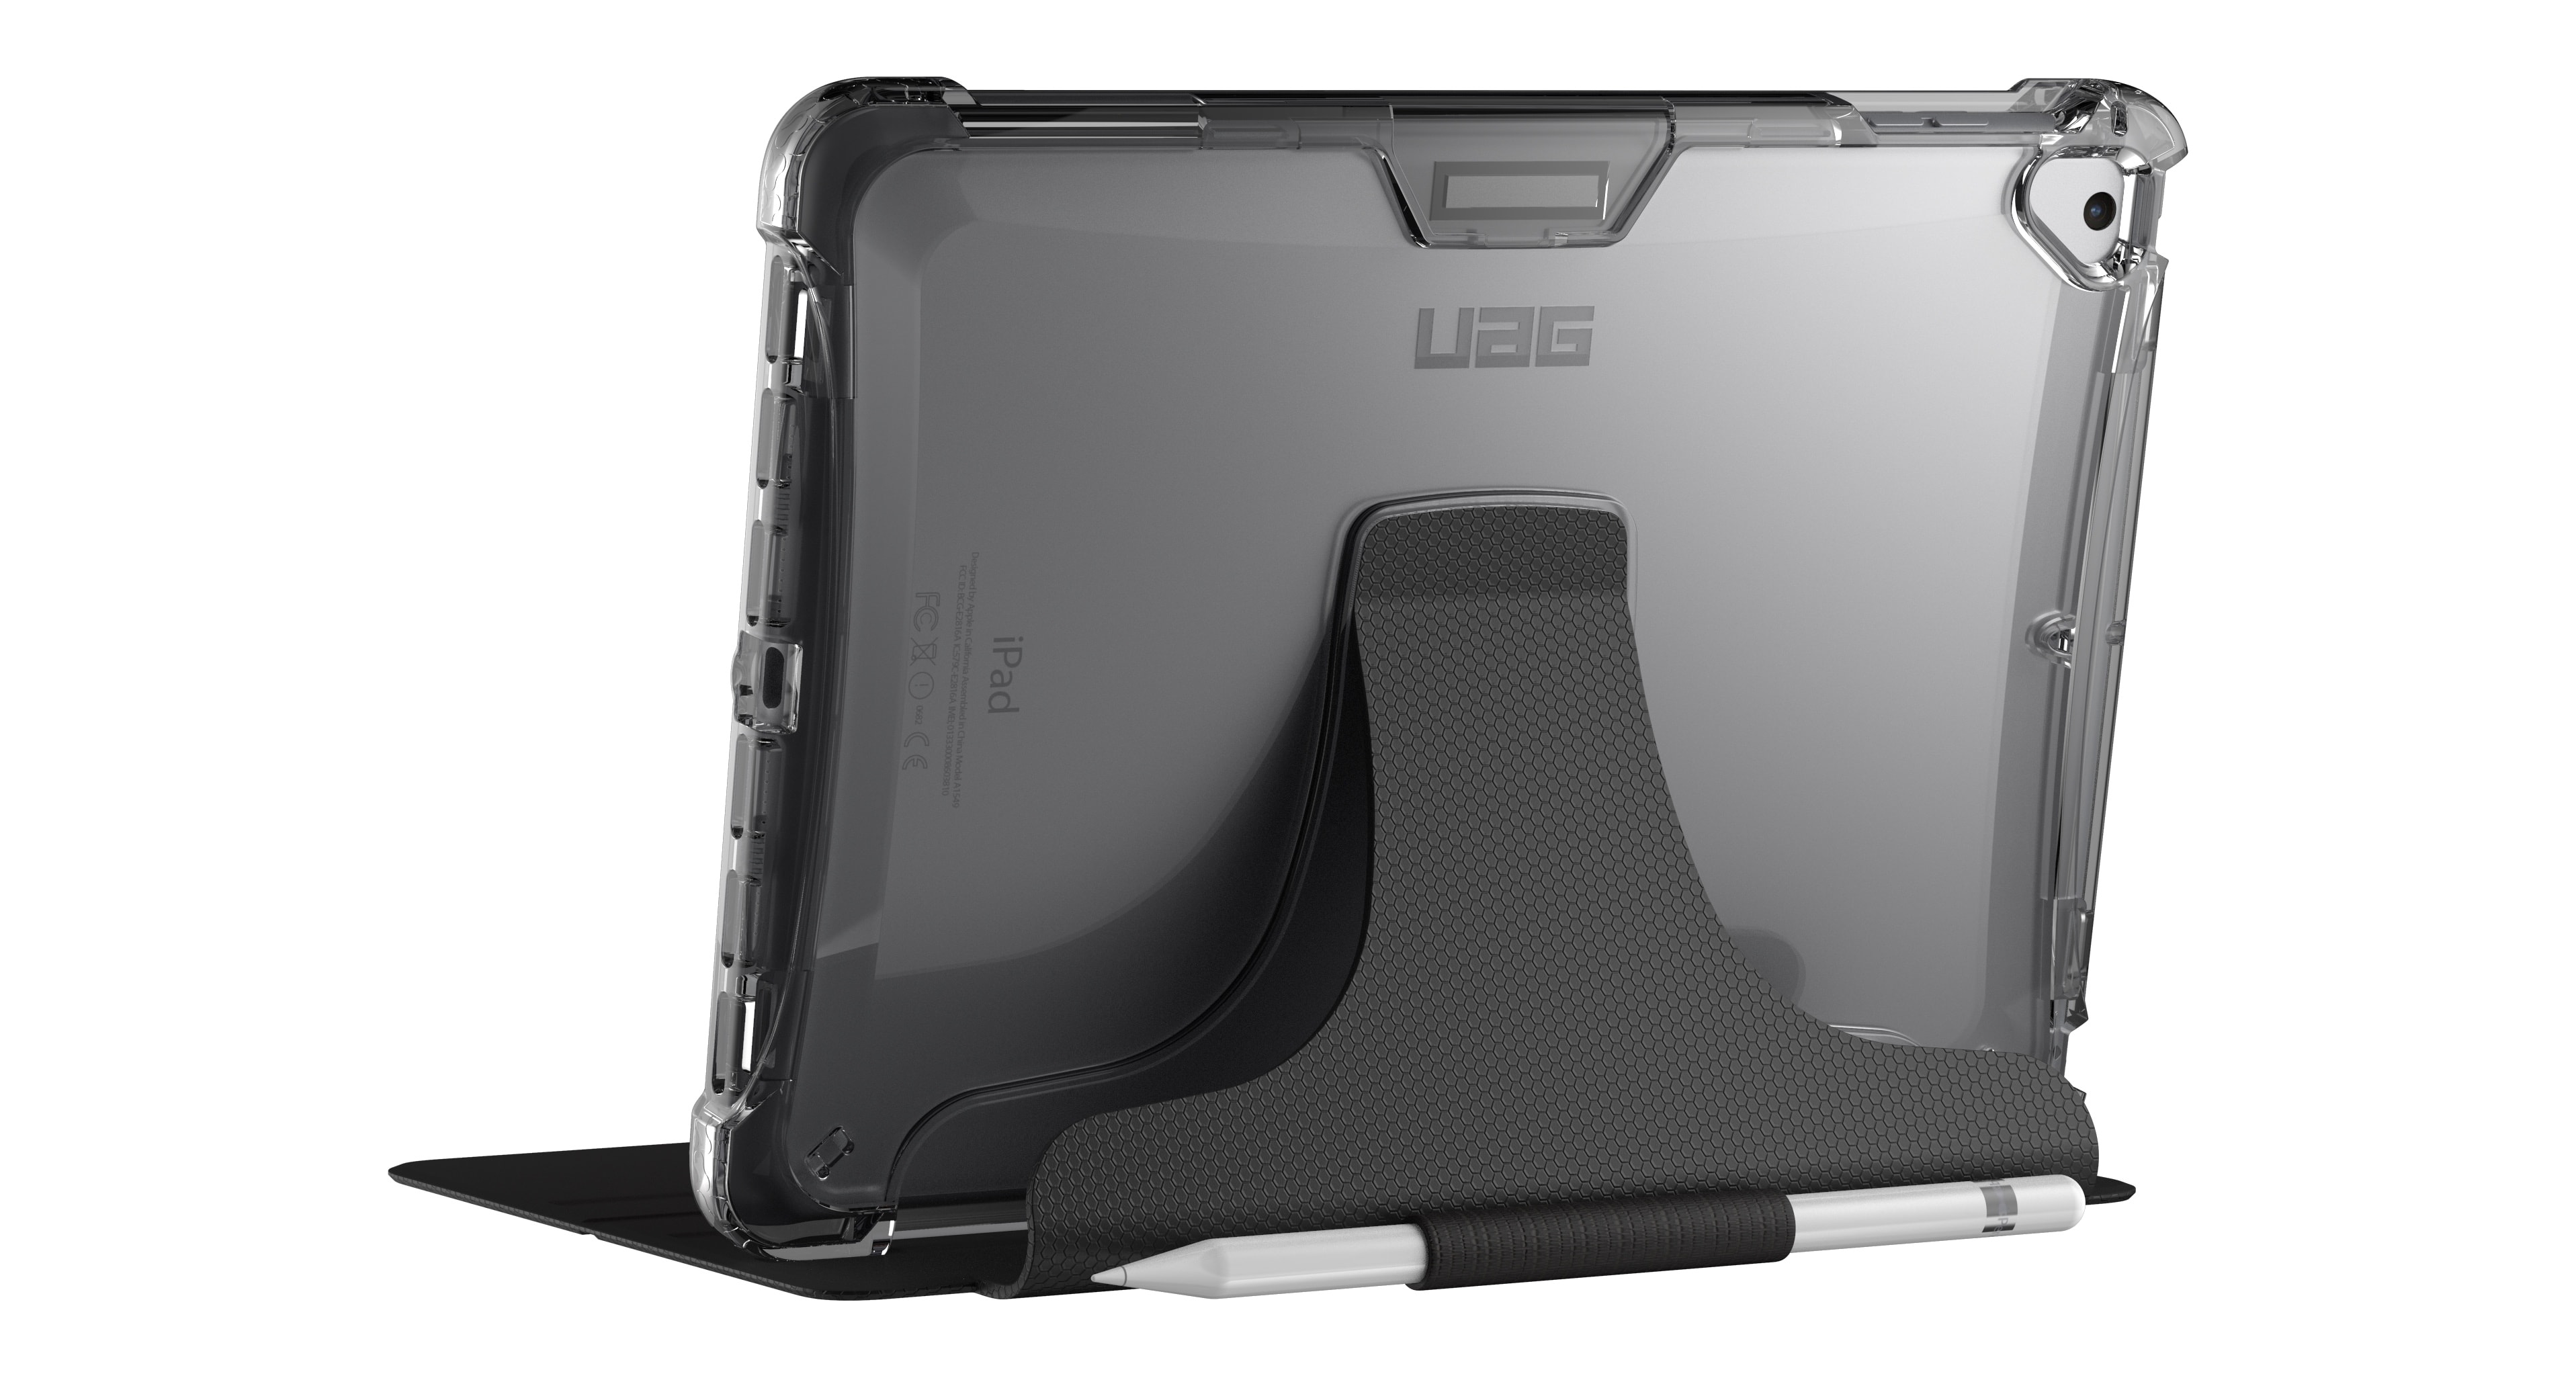 Despite being semi-transparent, UAG’s Plyo Series meets military drop-test standards.